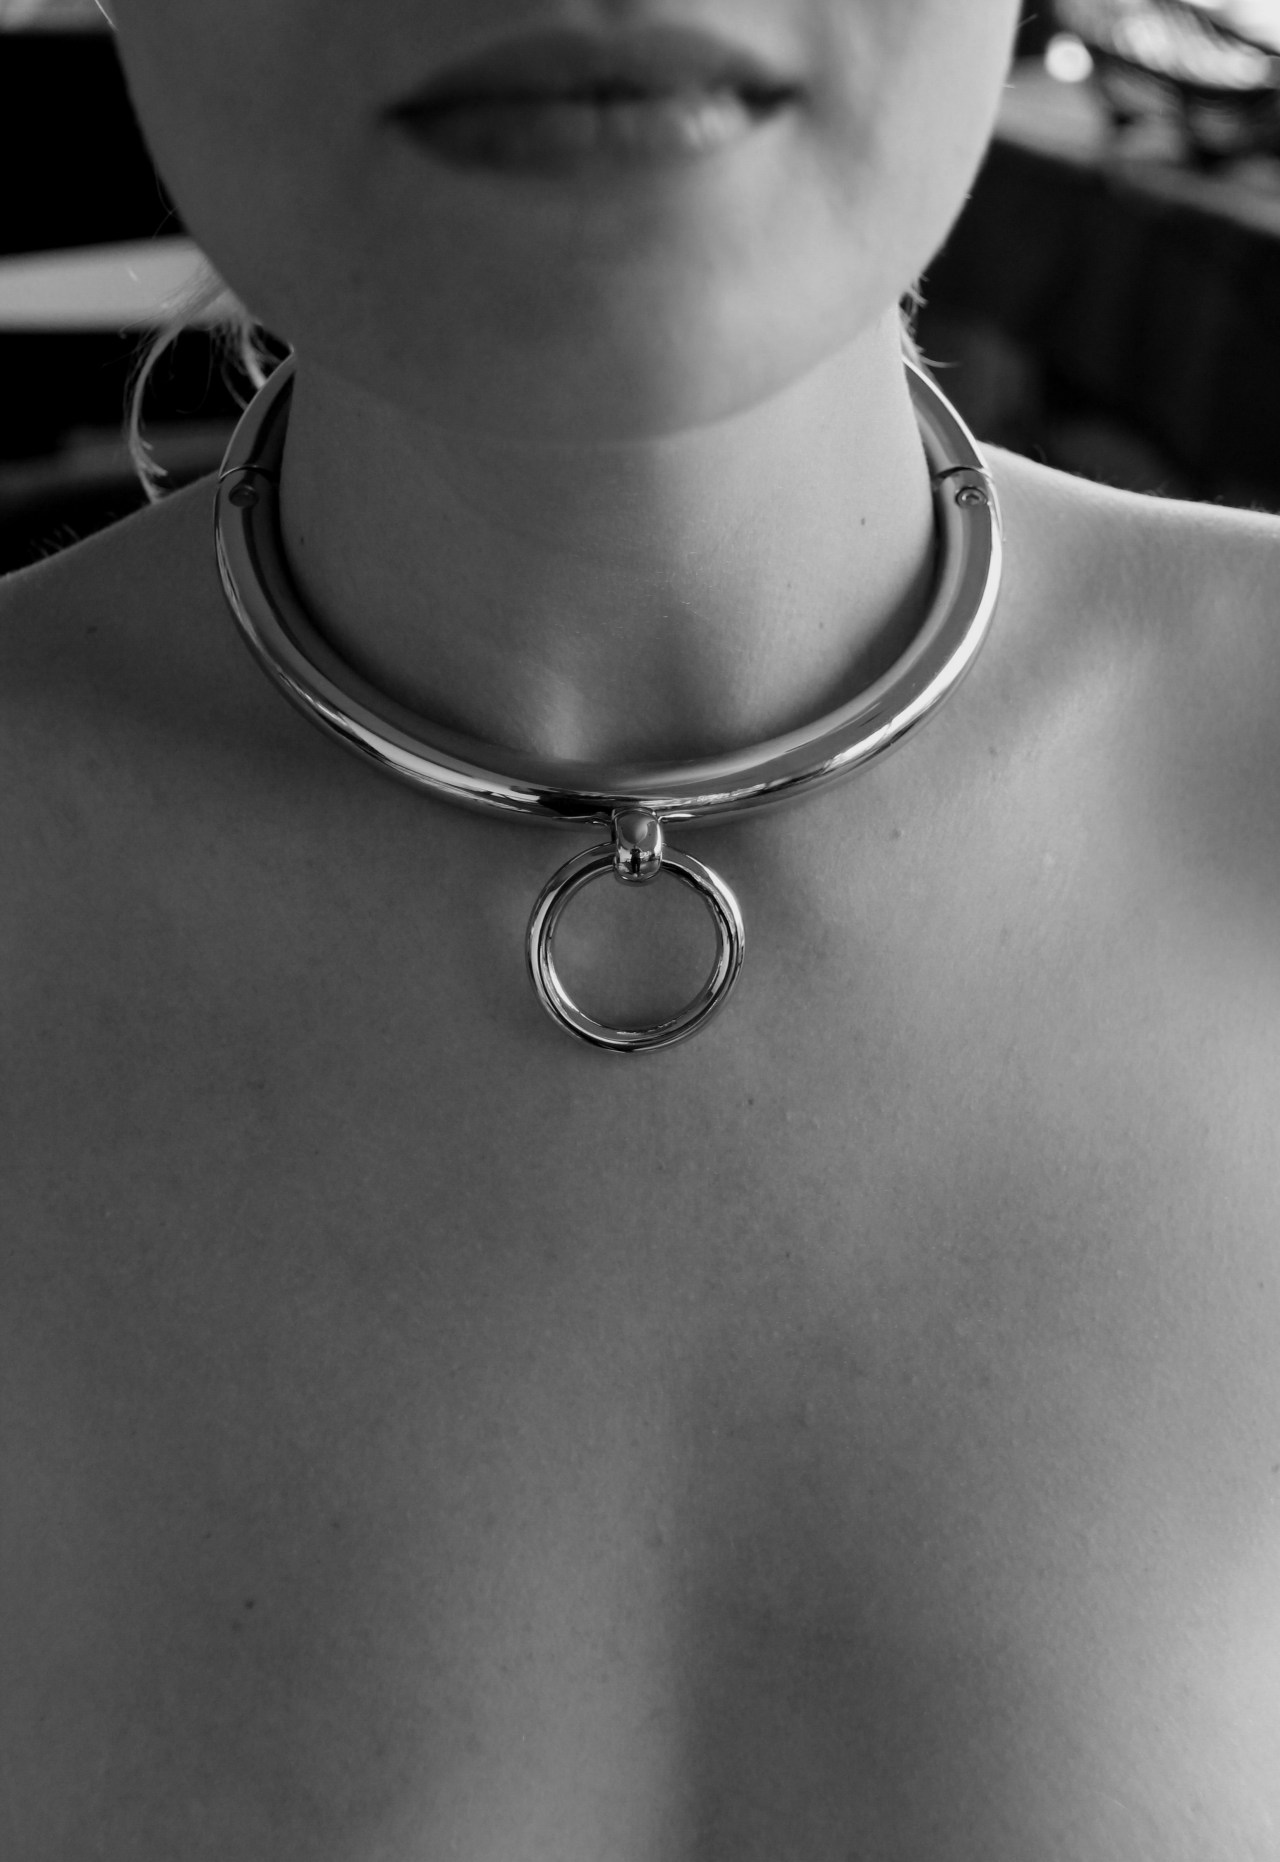 I love steel collars - the weight, the permanence, the aesthetic.  Nothing says